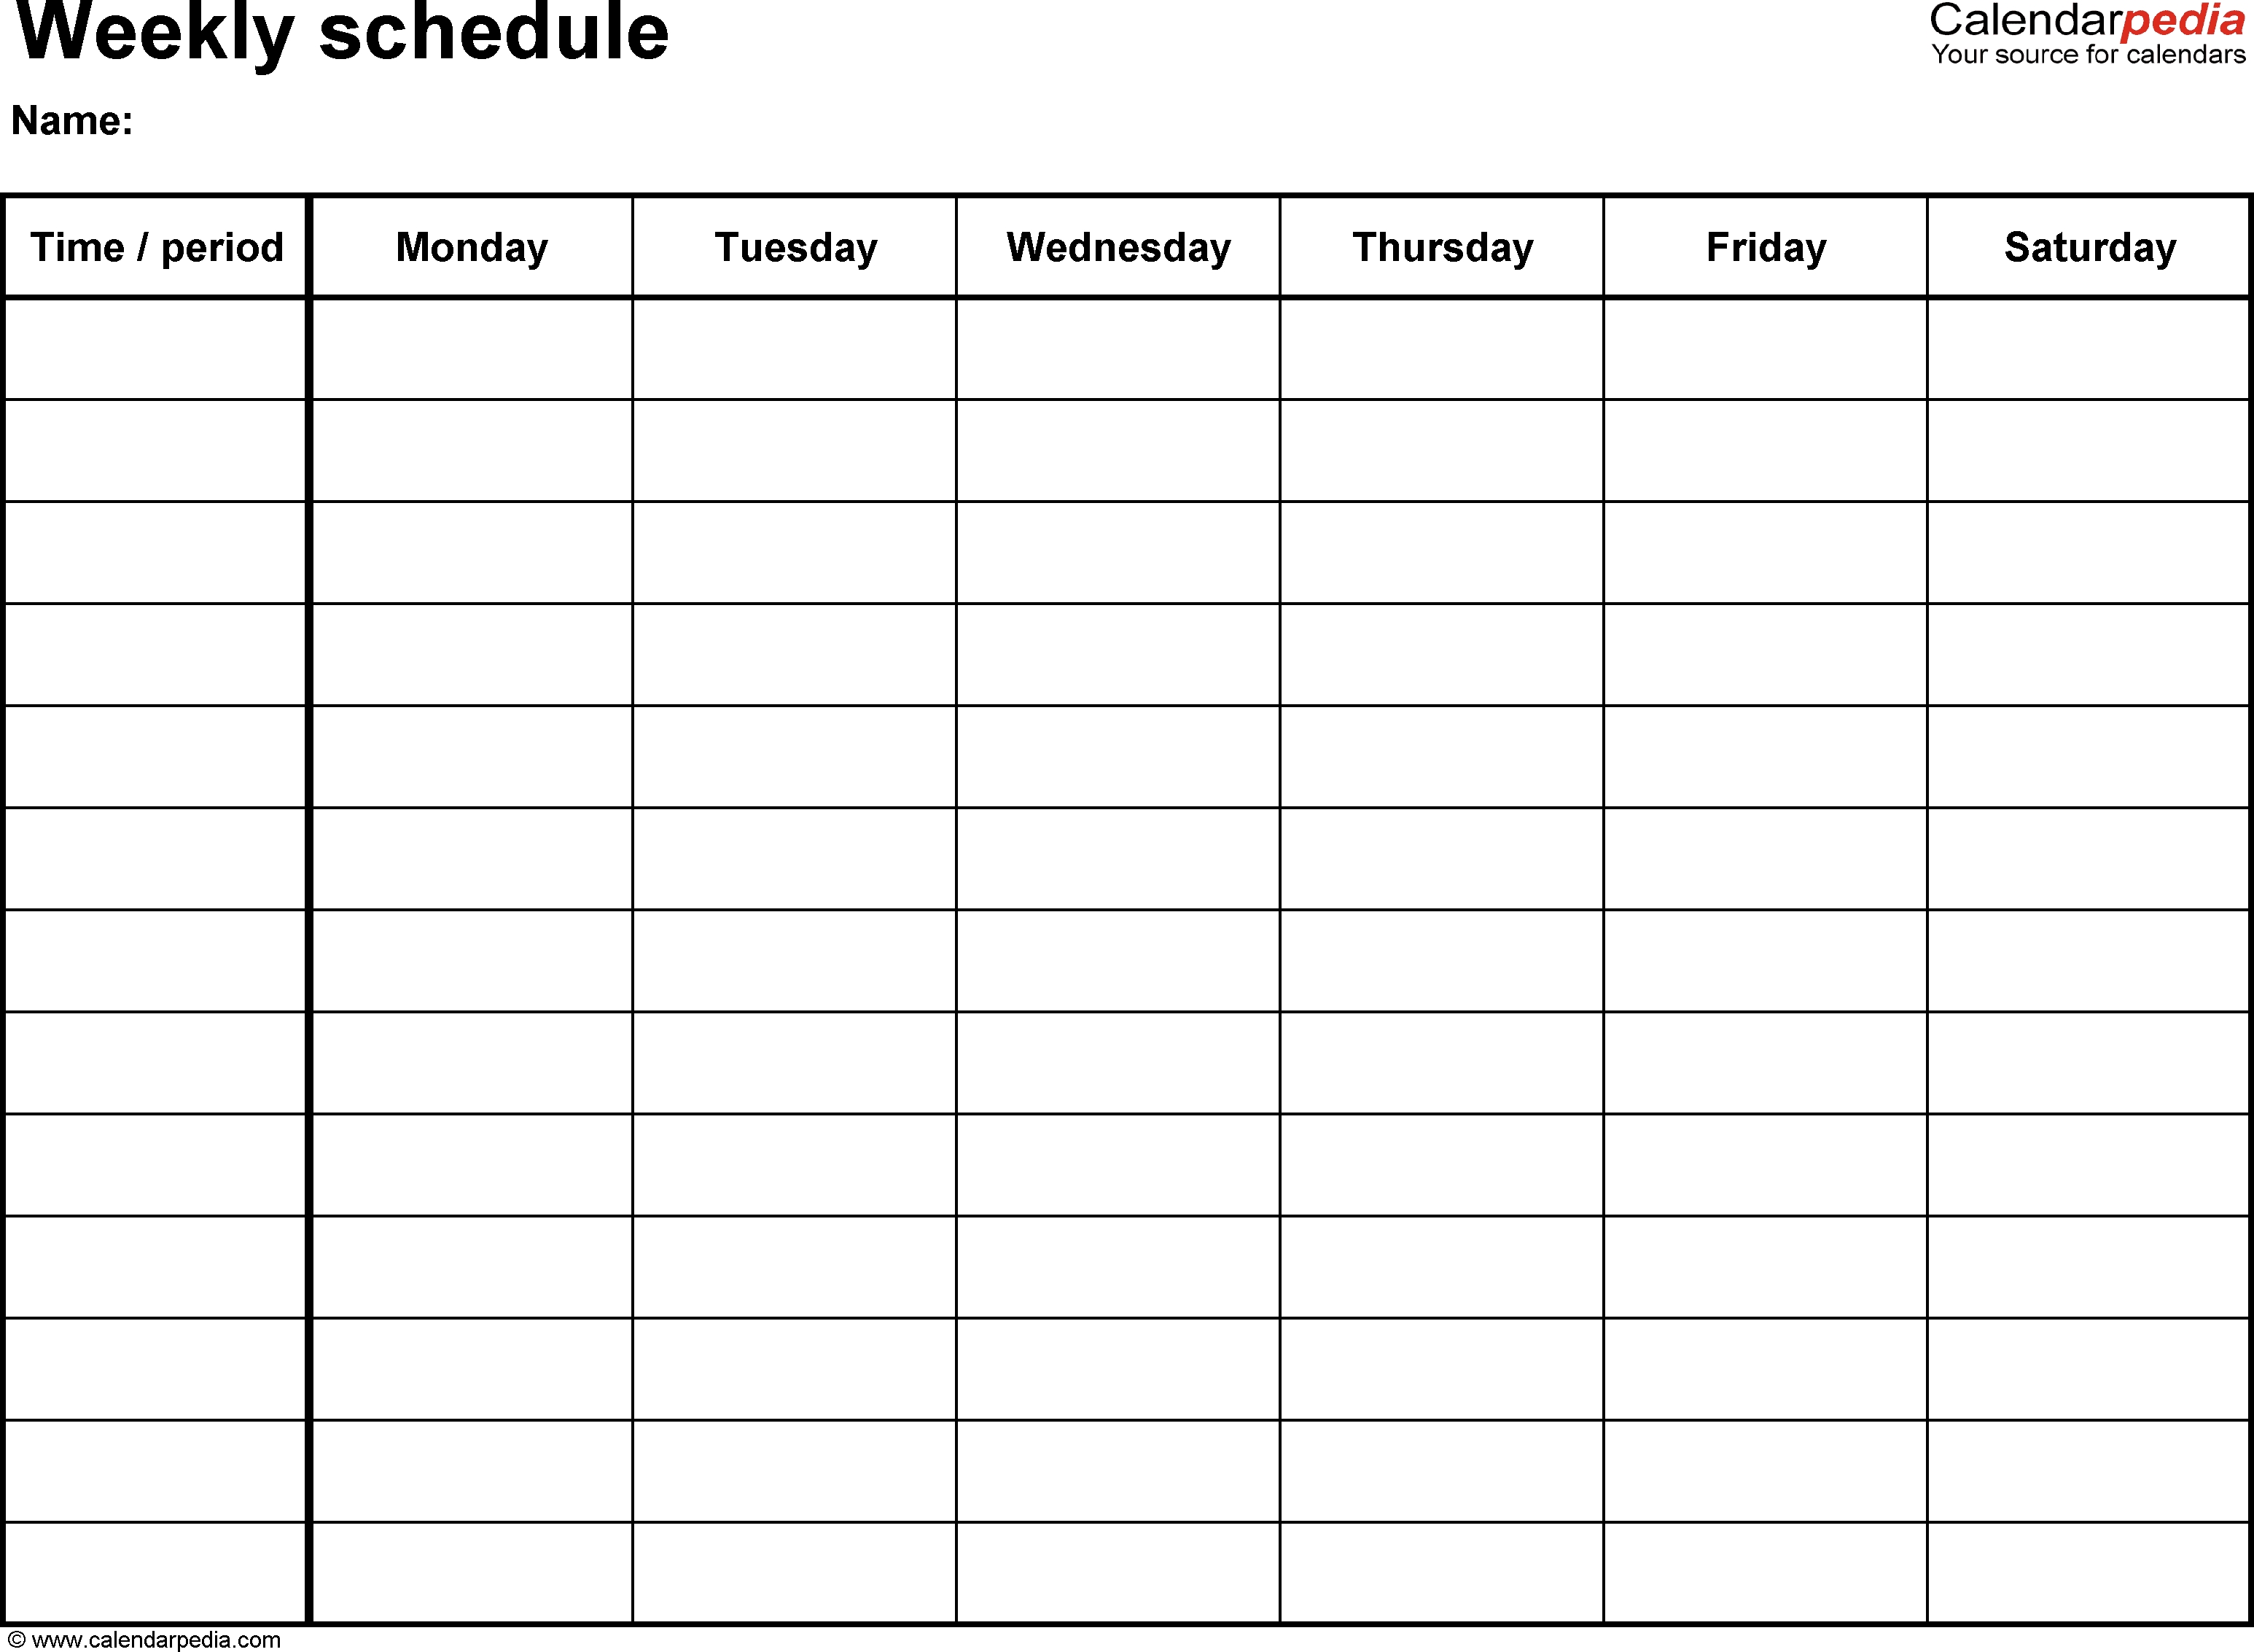 Free Weekly Schedule Templates For Word - 18 Templates-Weekly Calendar Templates Free Printable Monday-Friday